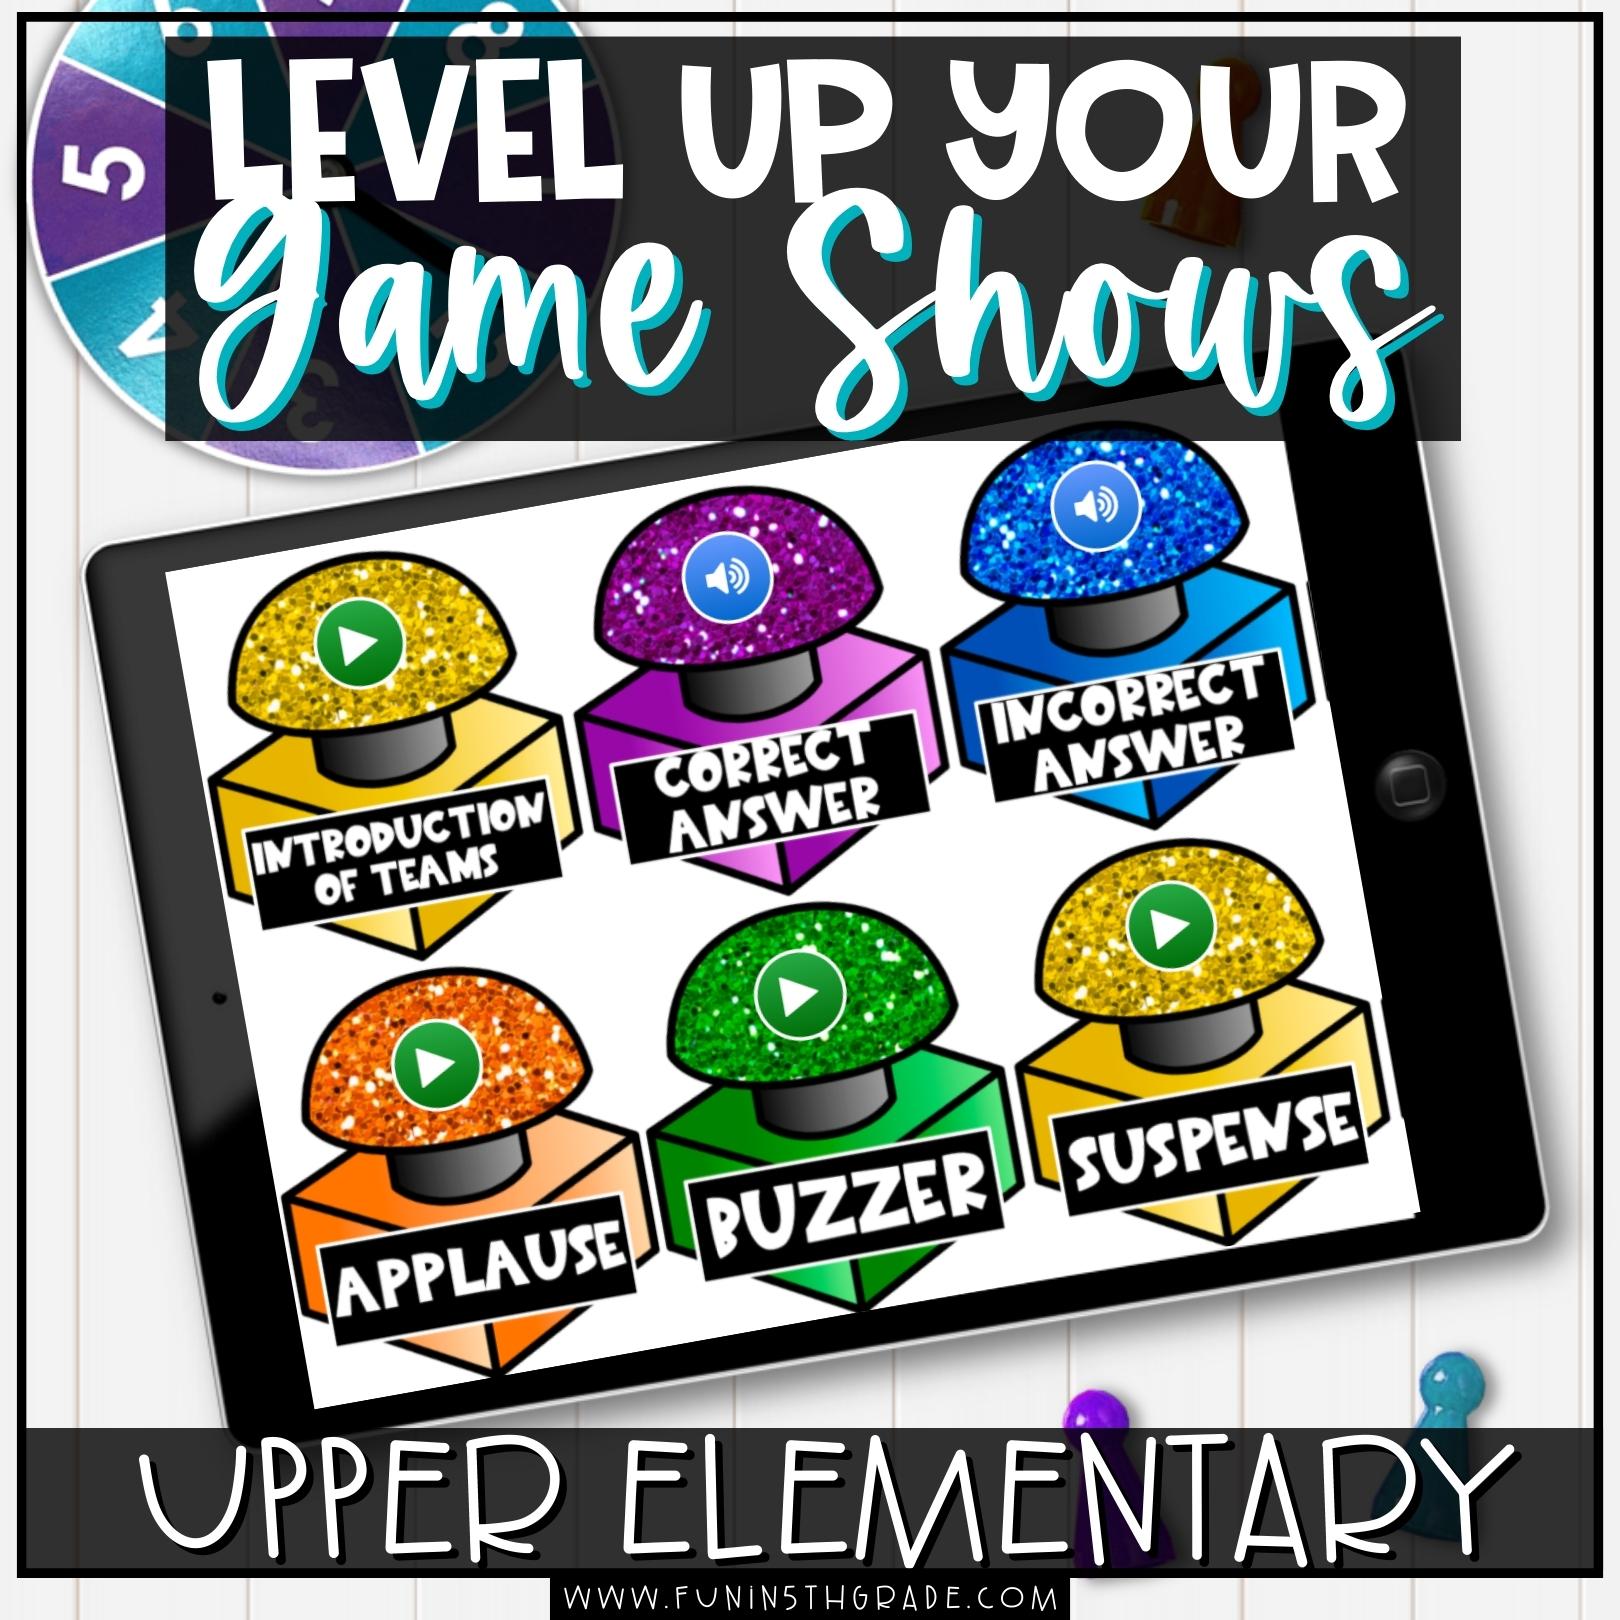 Up Level your Game Shows Cover Image with buzzer sounds in Tablet image